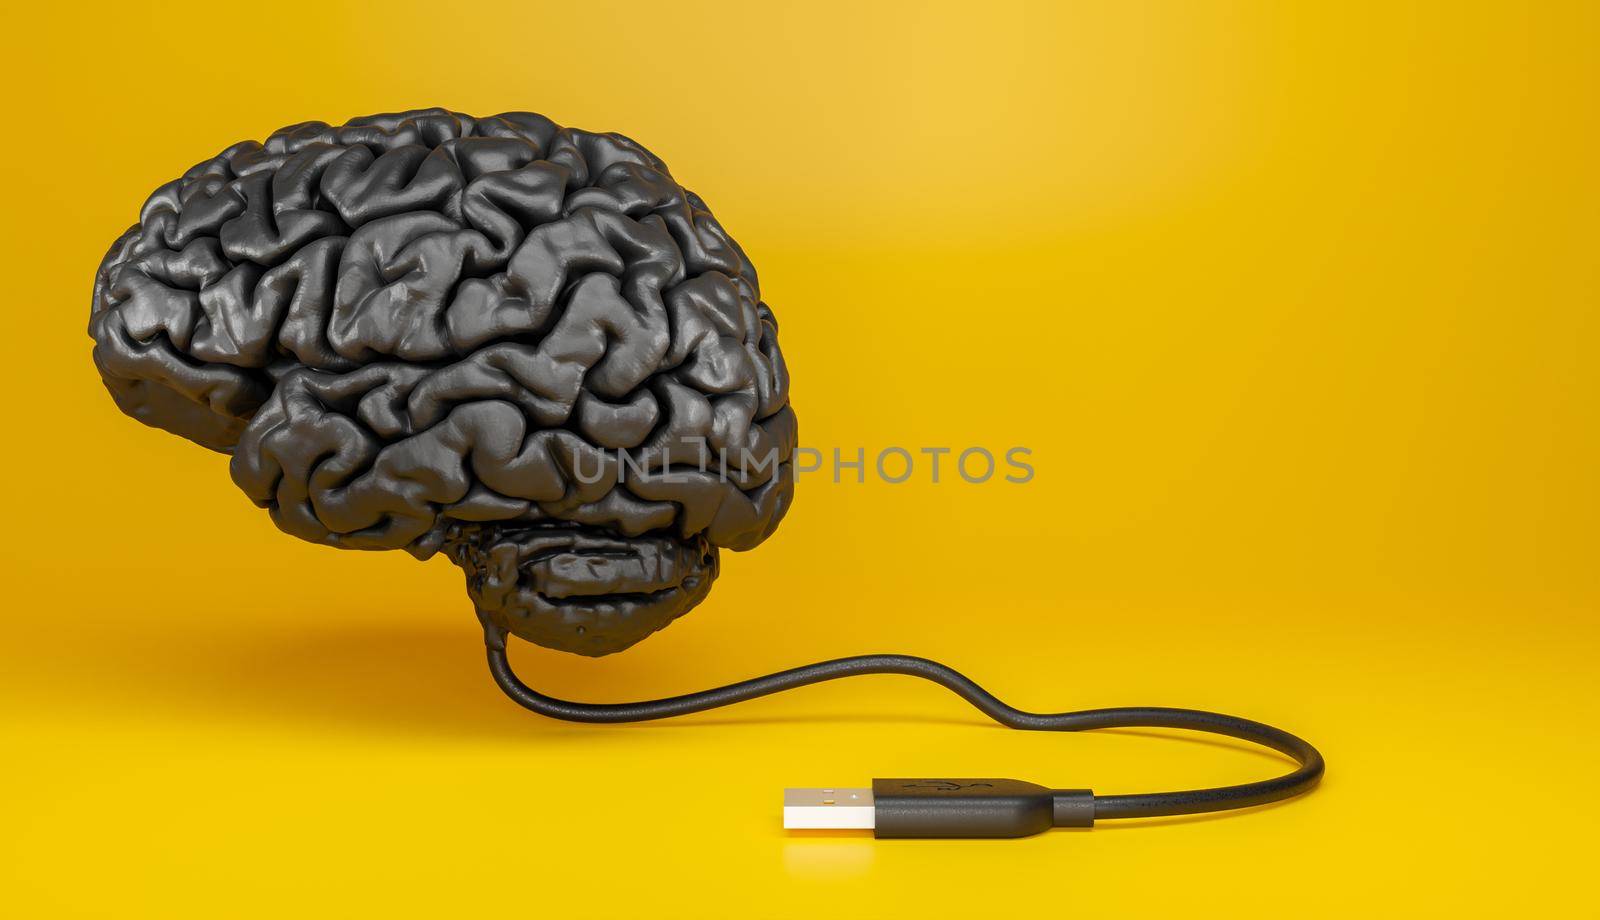 representation of a human brain with usb cable by asolano